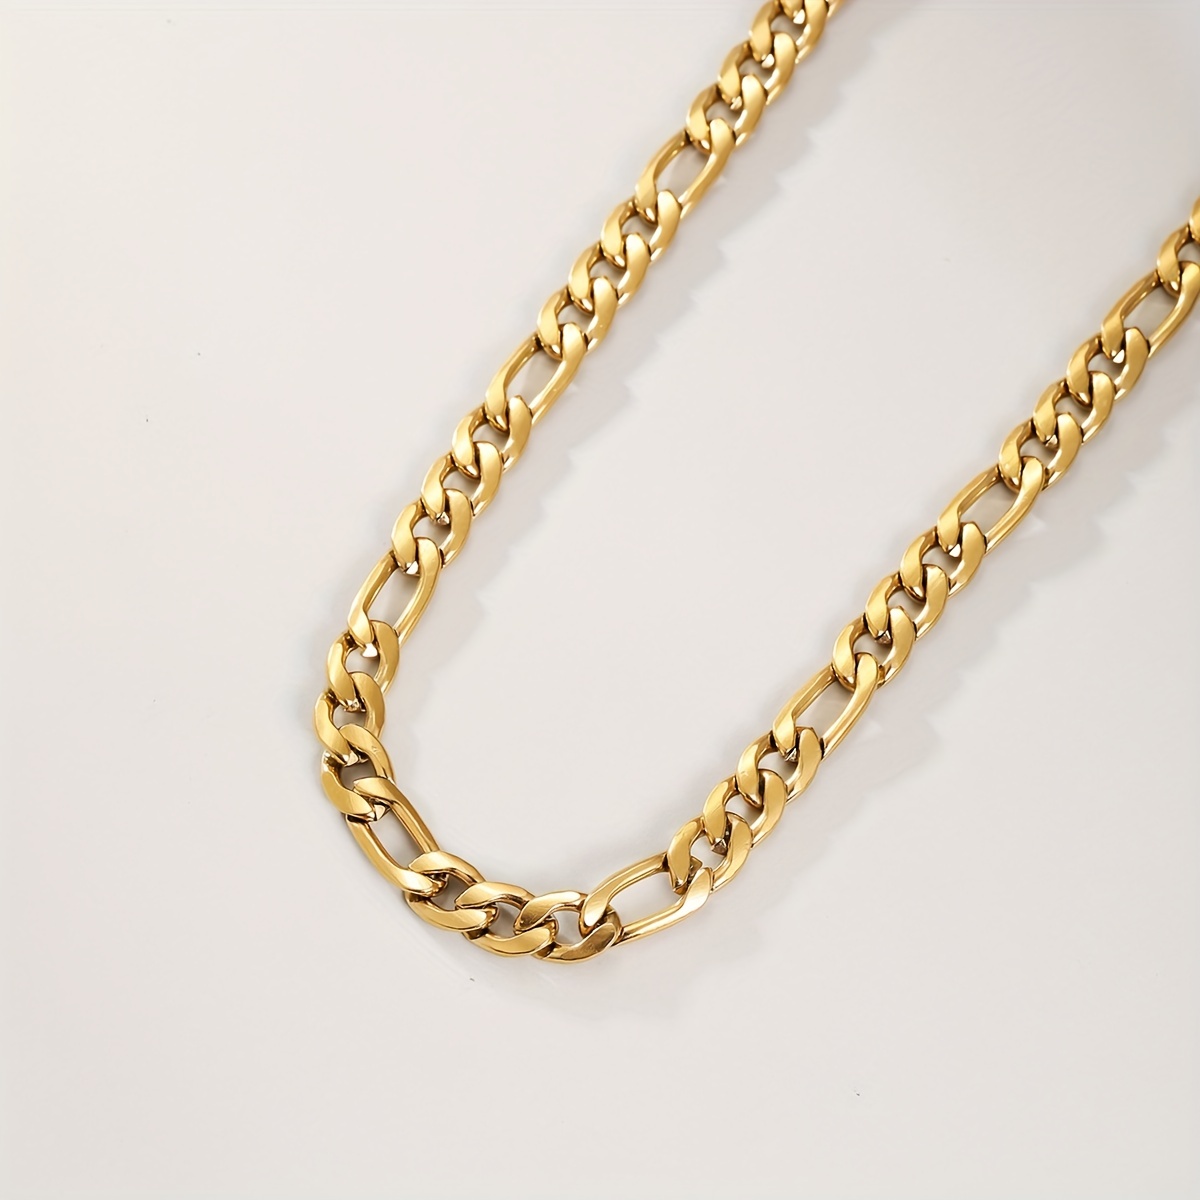 1pc Stainless Steel Golden Chain Necklace, Hip Hop Fashion Jewelry For Men  Women, Party Gift